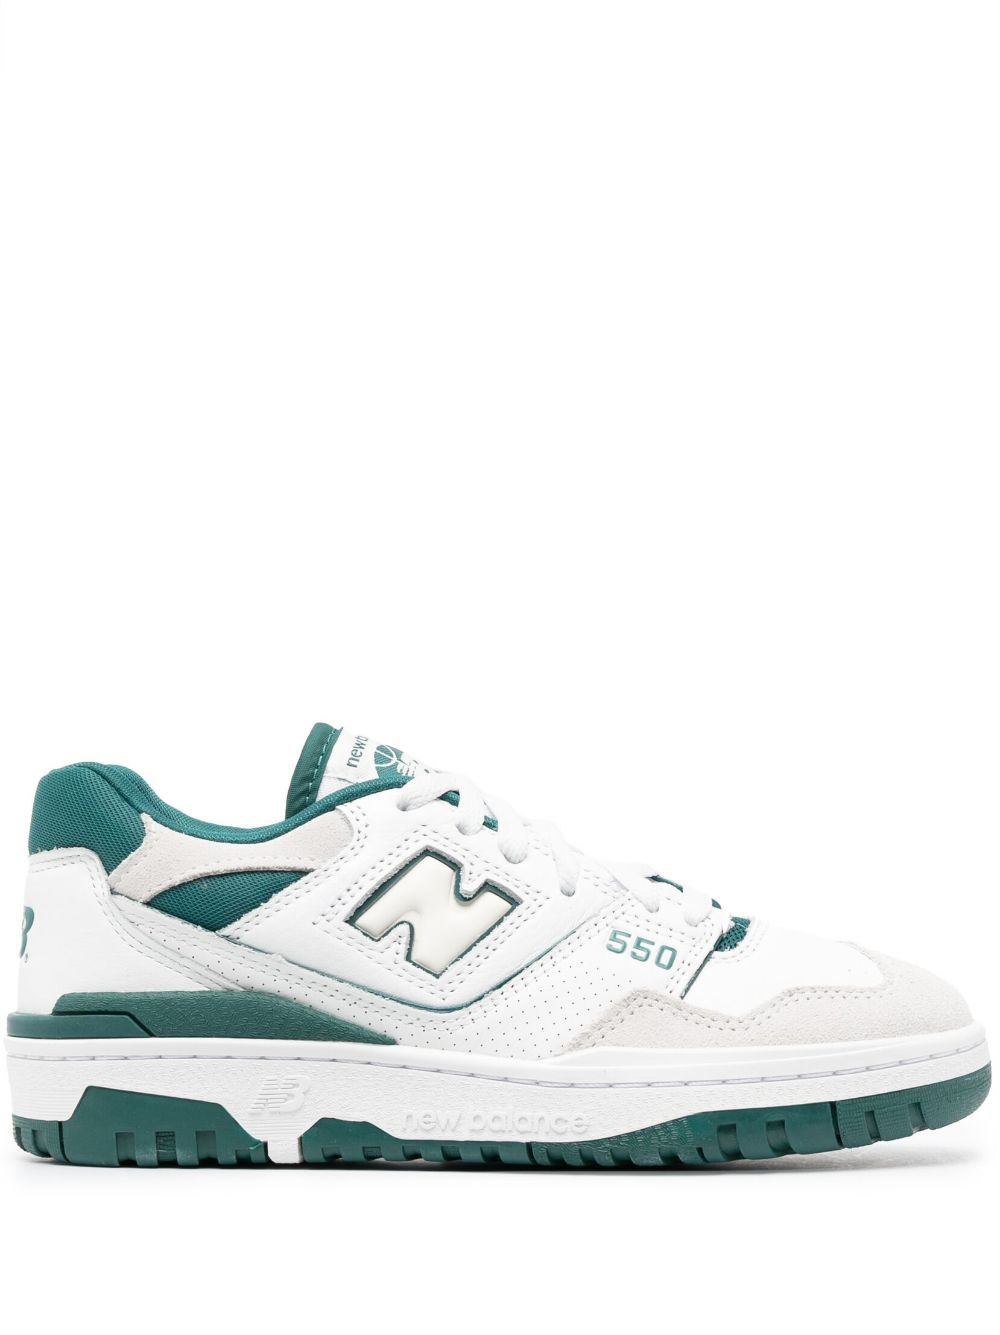 550 New Balance Lifestyle Sneakers